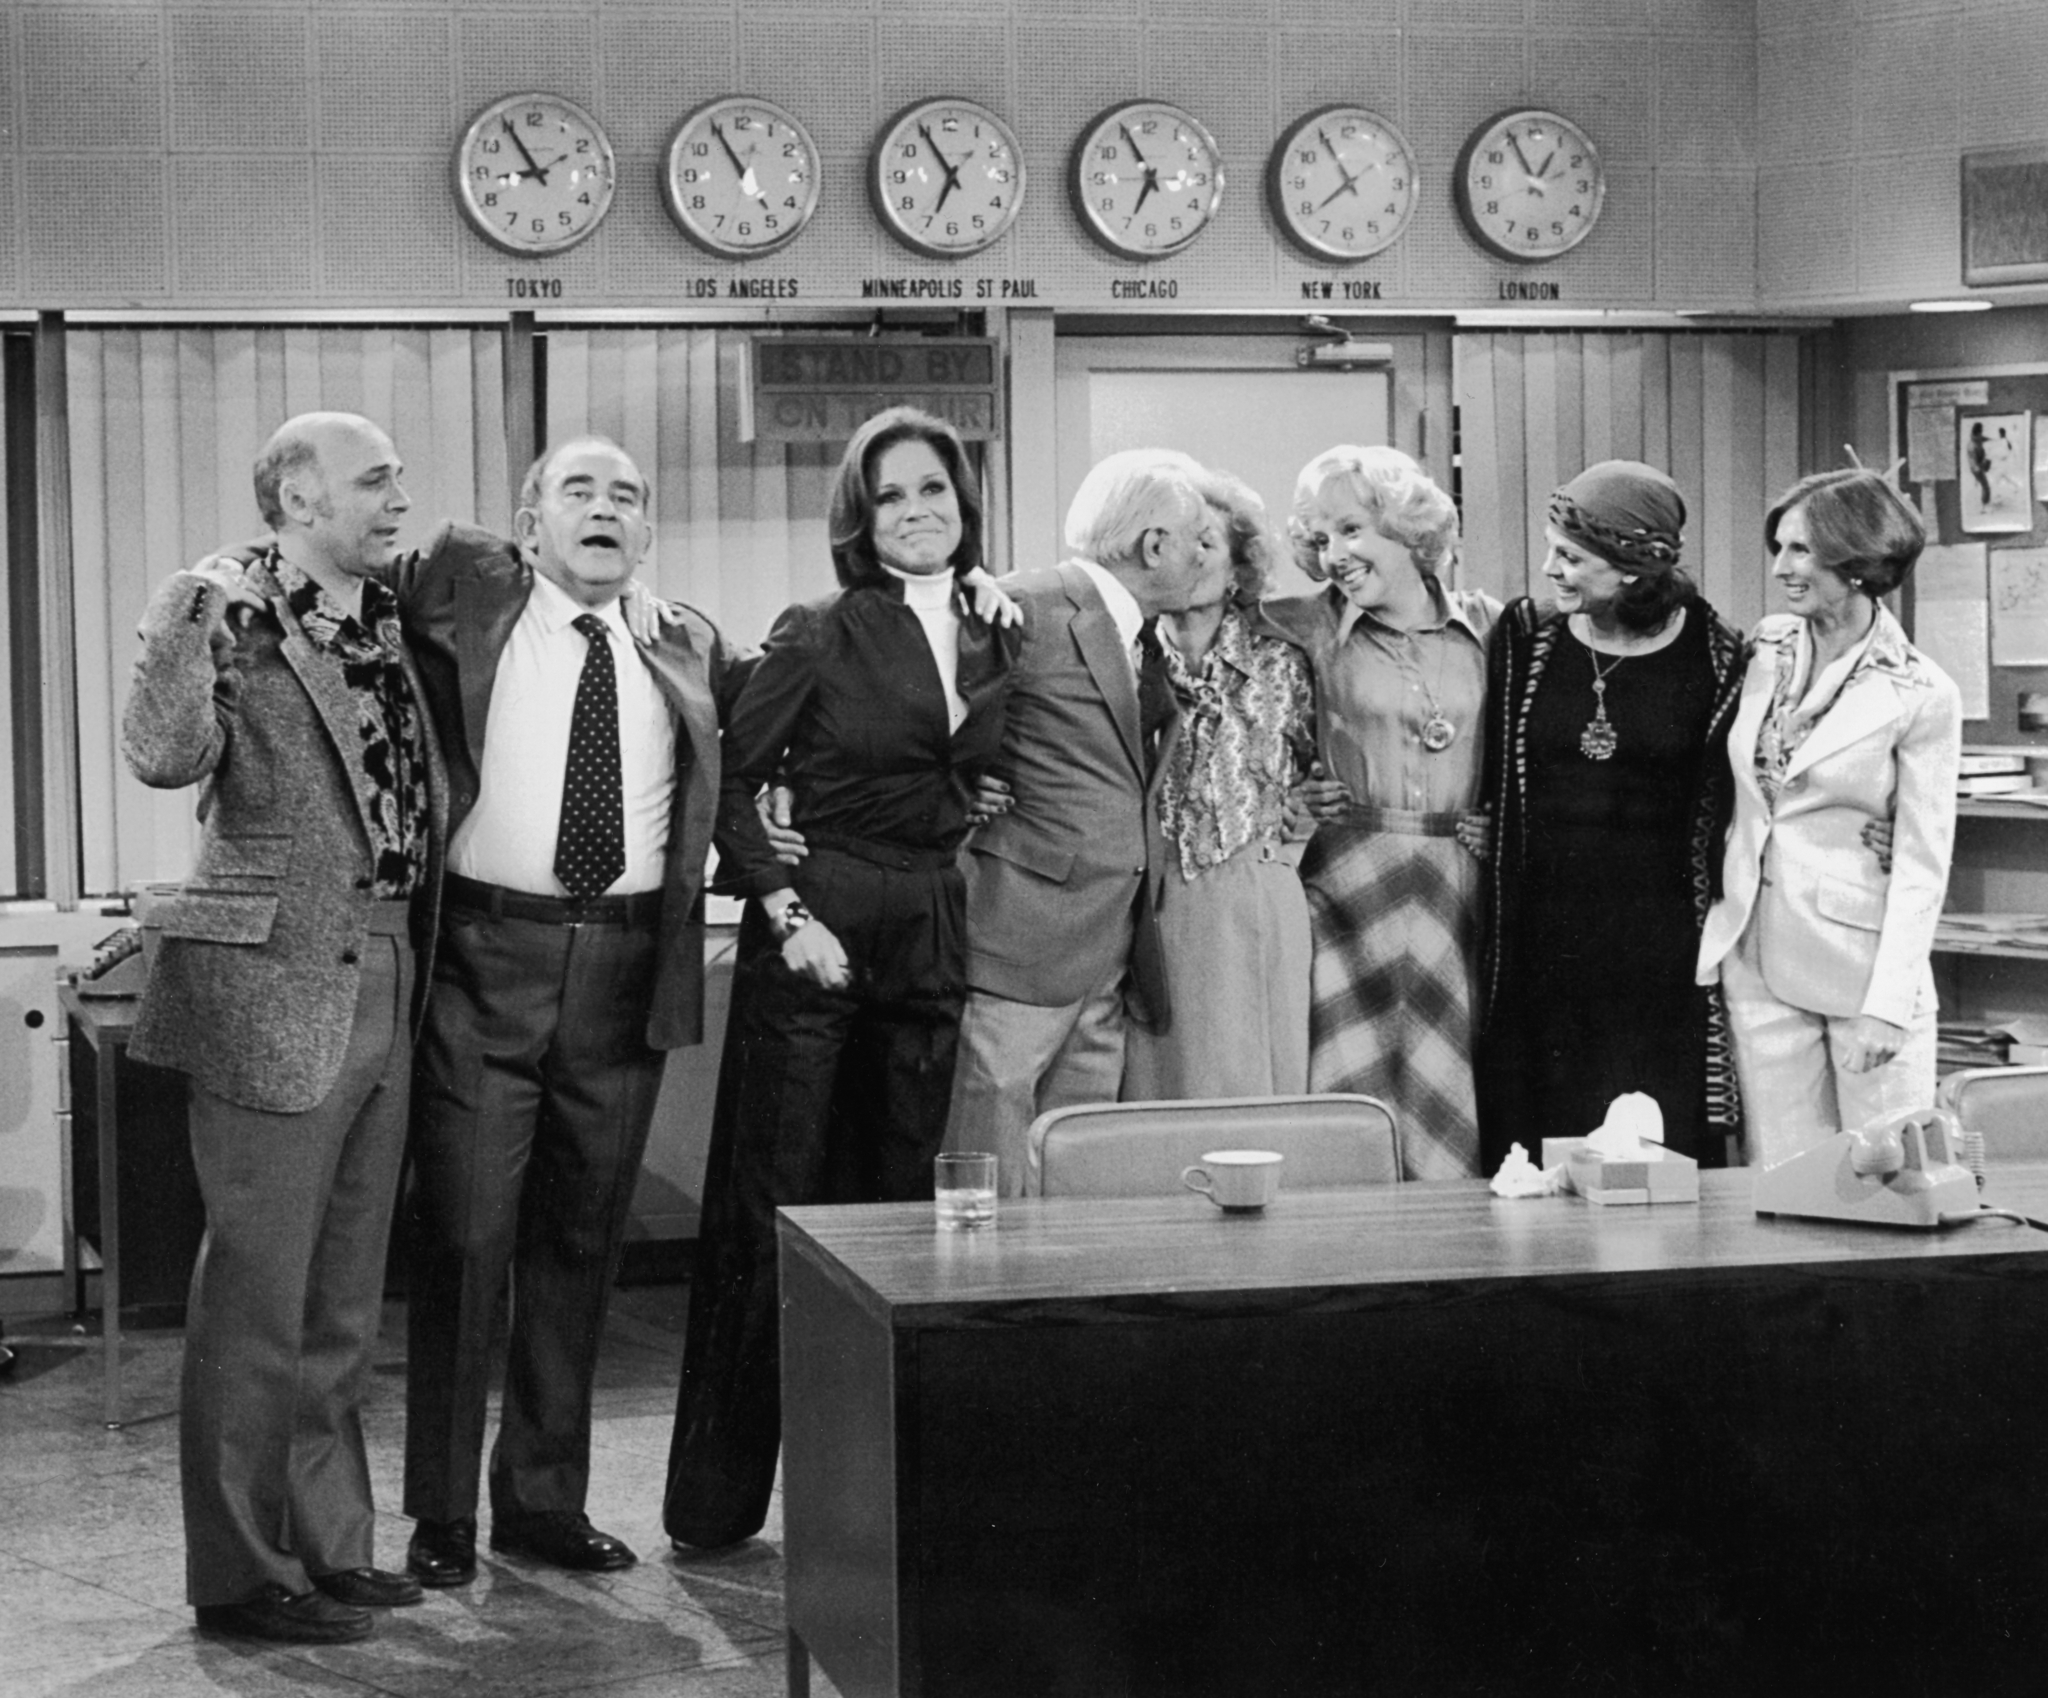 Edward Asner, Cloris Leachman, Mary Tyler Moore and Ted Knight